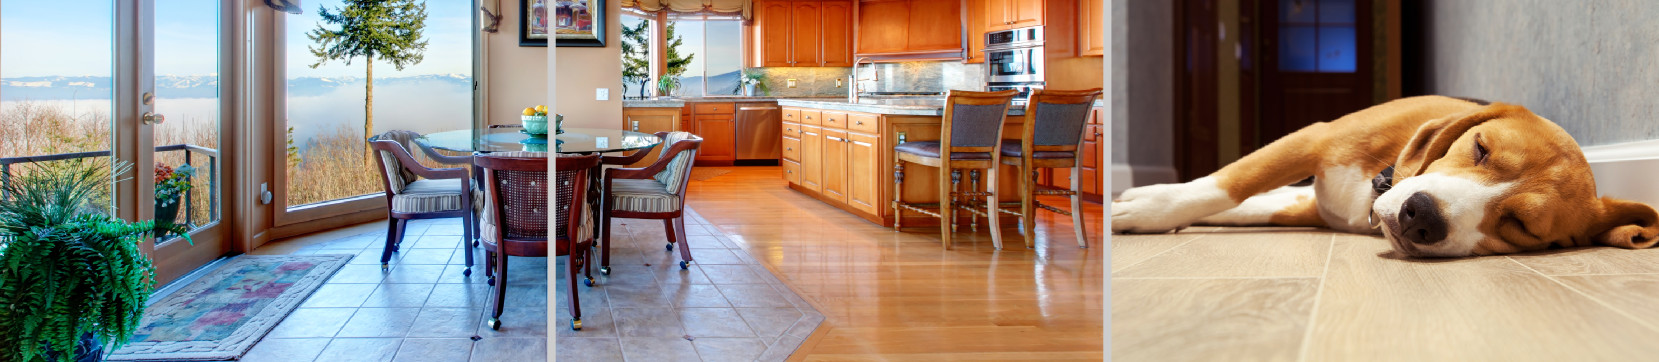 Two photos: a gorgeous dining room and kitchen with segmented tile areas, a sweet dog naps on a hardwood floor